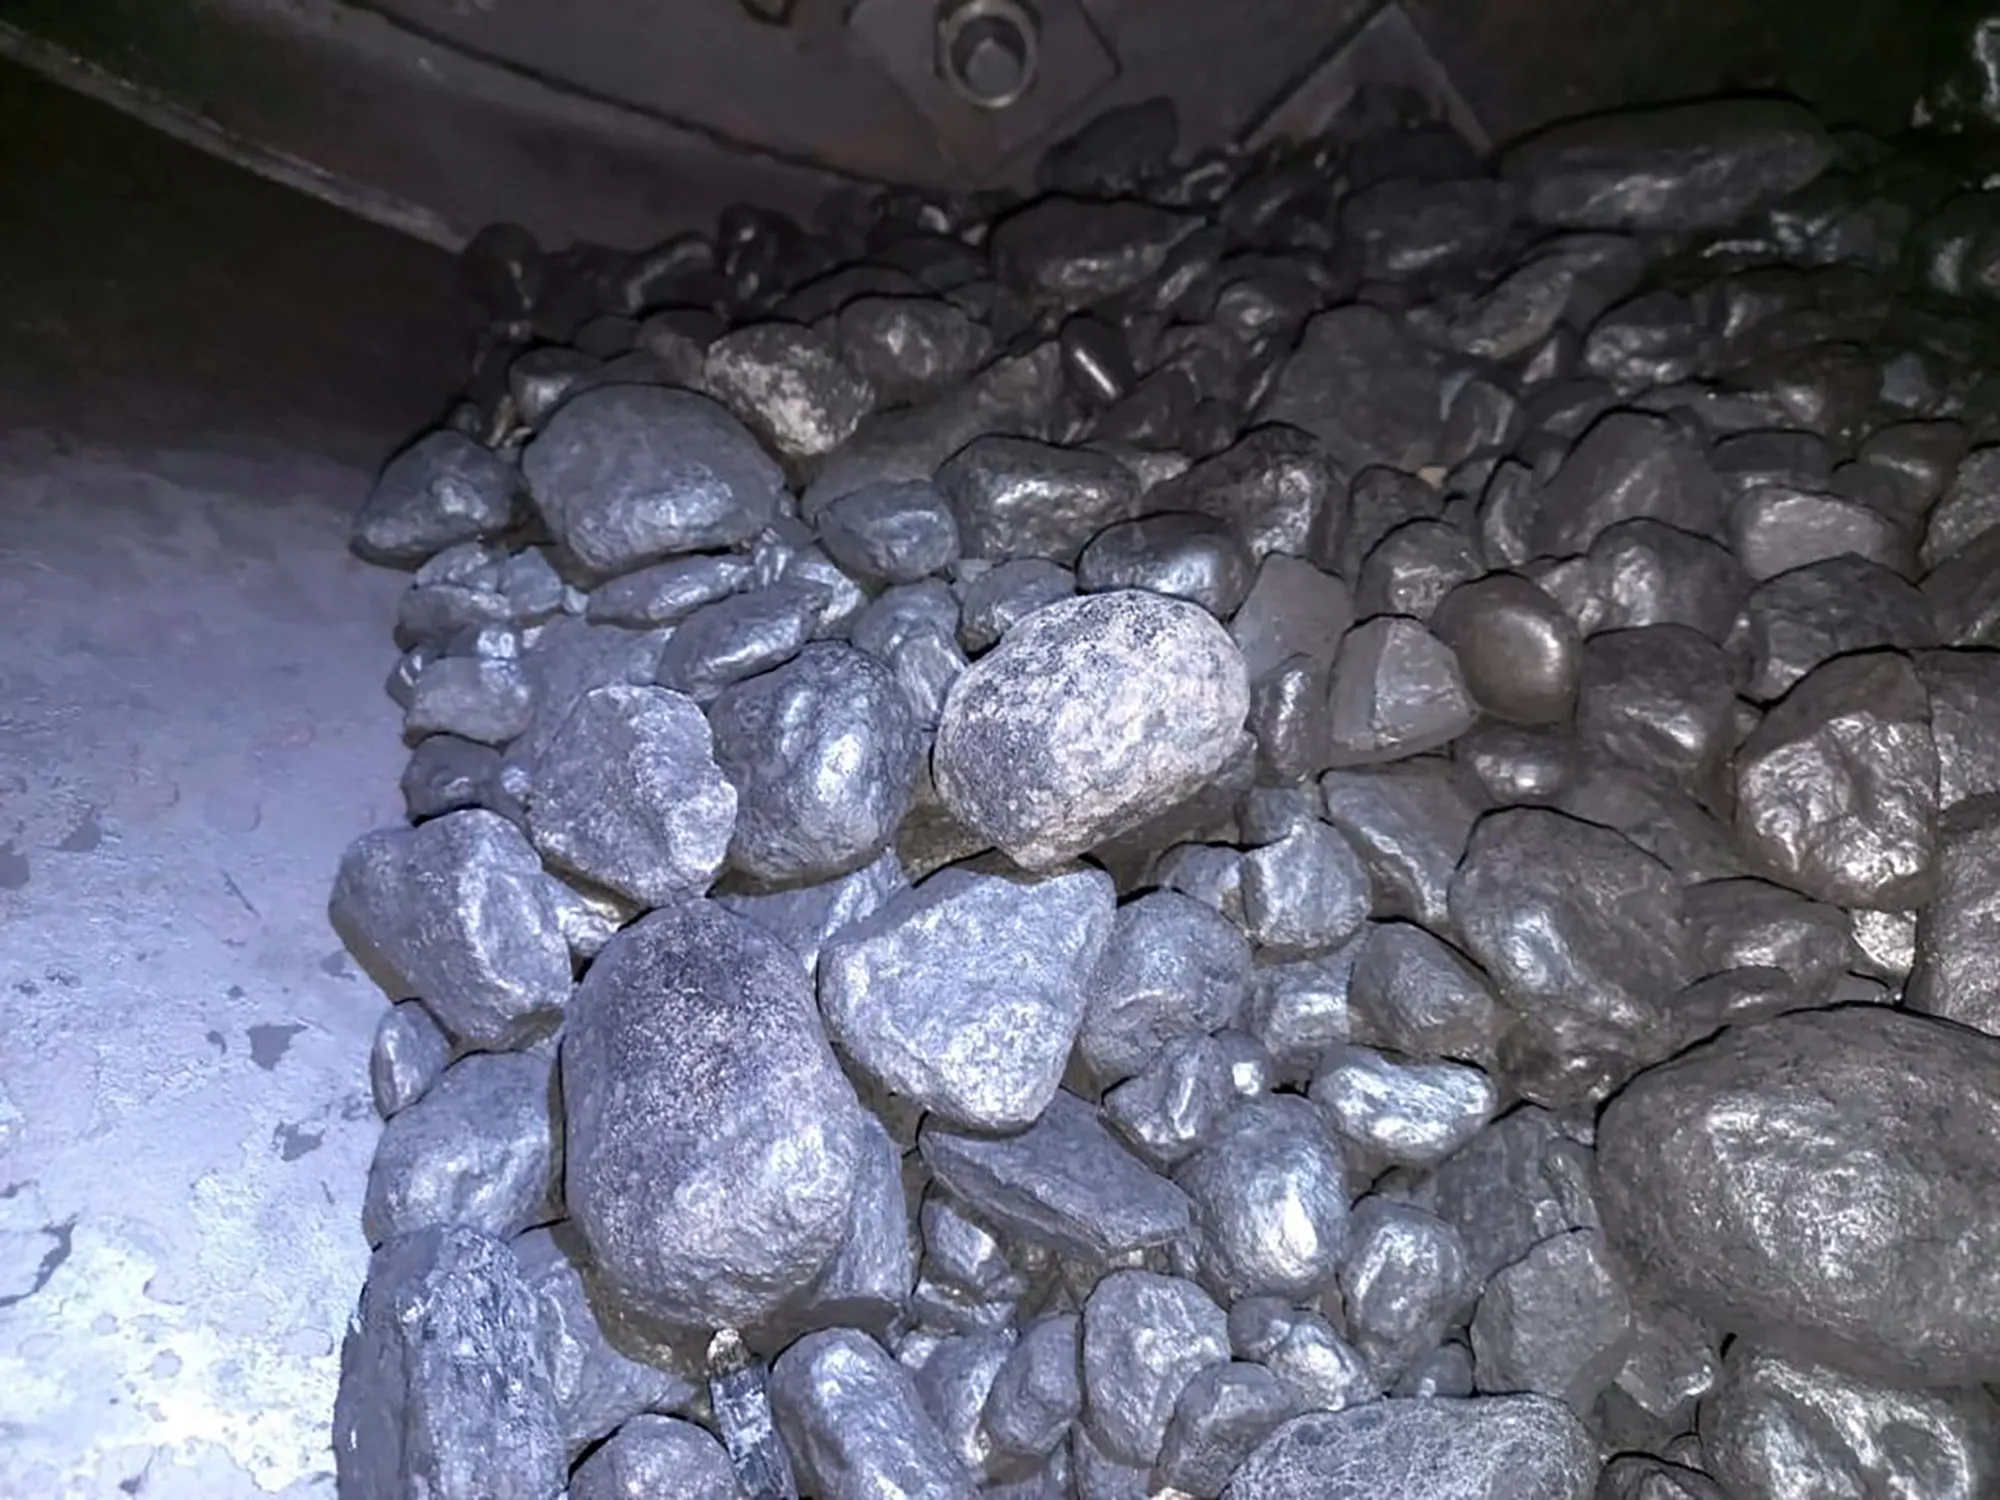 Poor-quality coal and rocks delivered to a power station at the behest of cartels, sabotage Eskom operations.